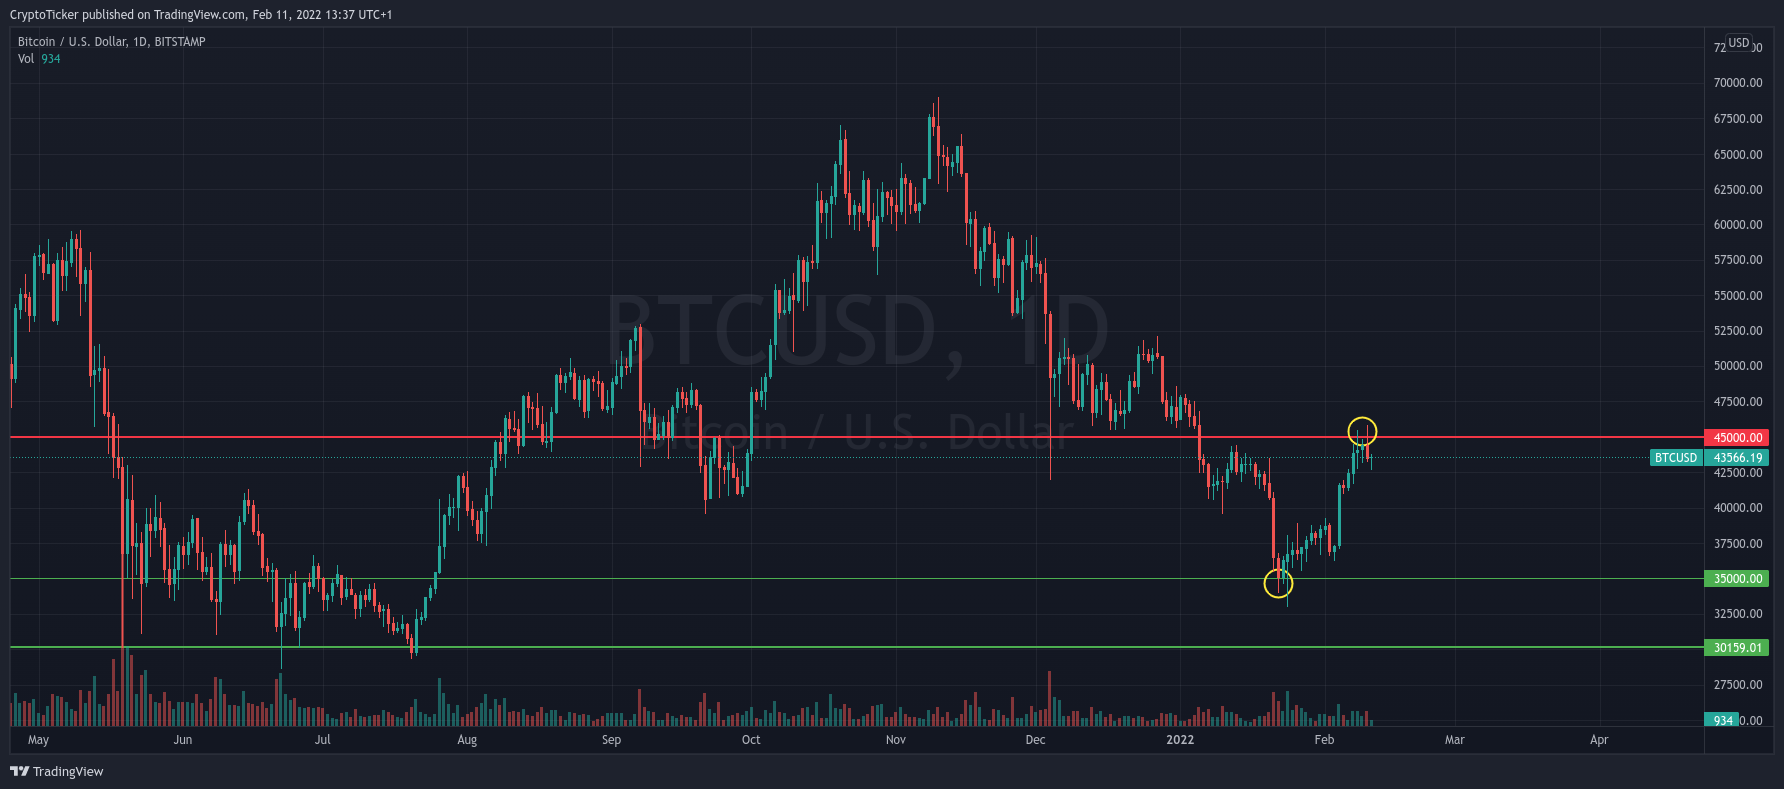 BTC/USD 1-day chart showing the retracement of BTC 